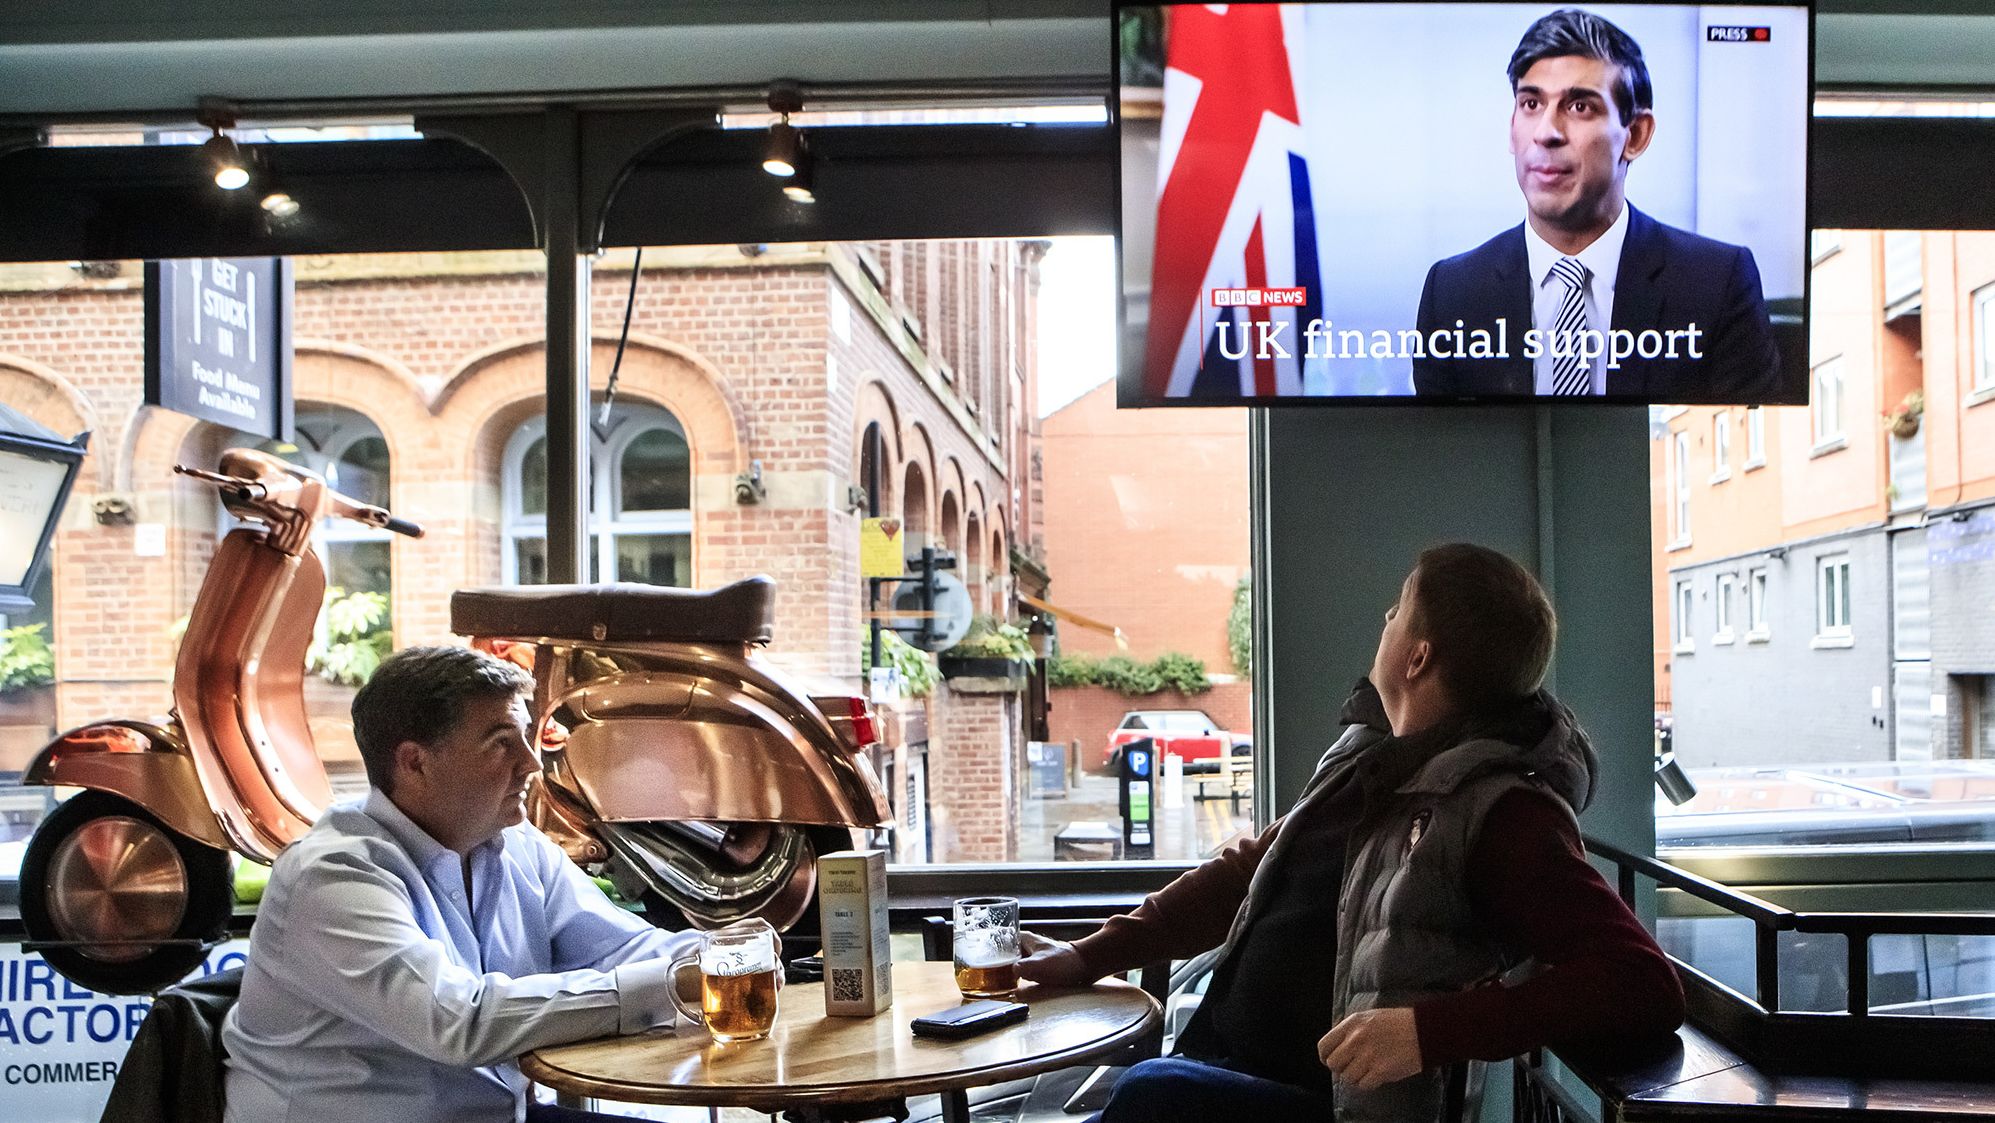 In October 2020, customers at the Tib Street Tavern in Manchester watch Sunak announce that the government will pay two-thirds of staff wages in pubs, restaurants and other businesses if they are forced to close under new coronavirus restrictions.